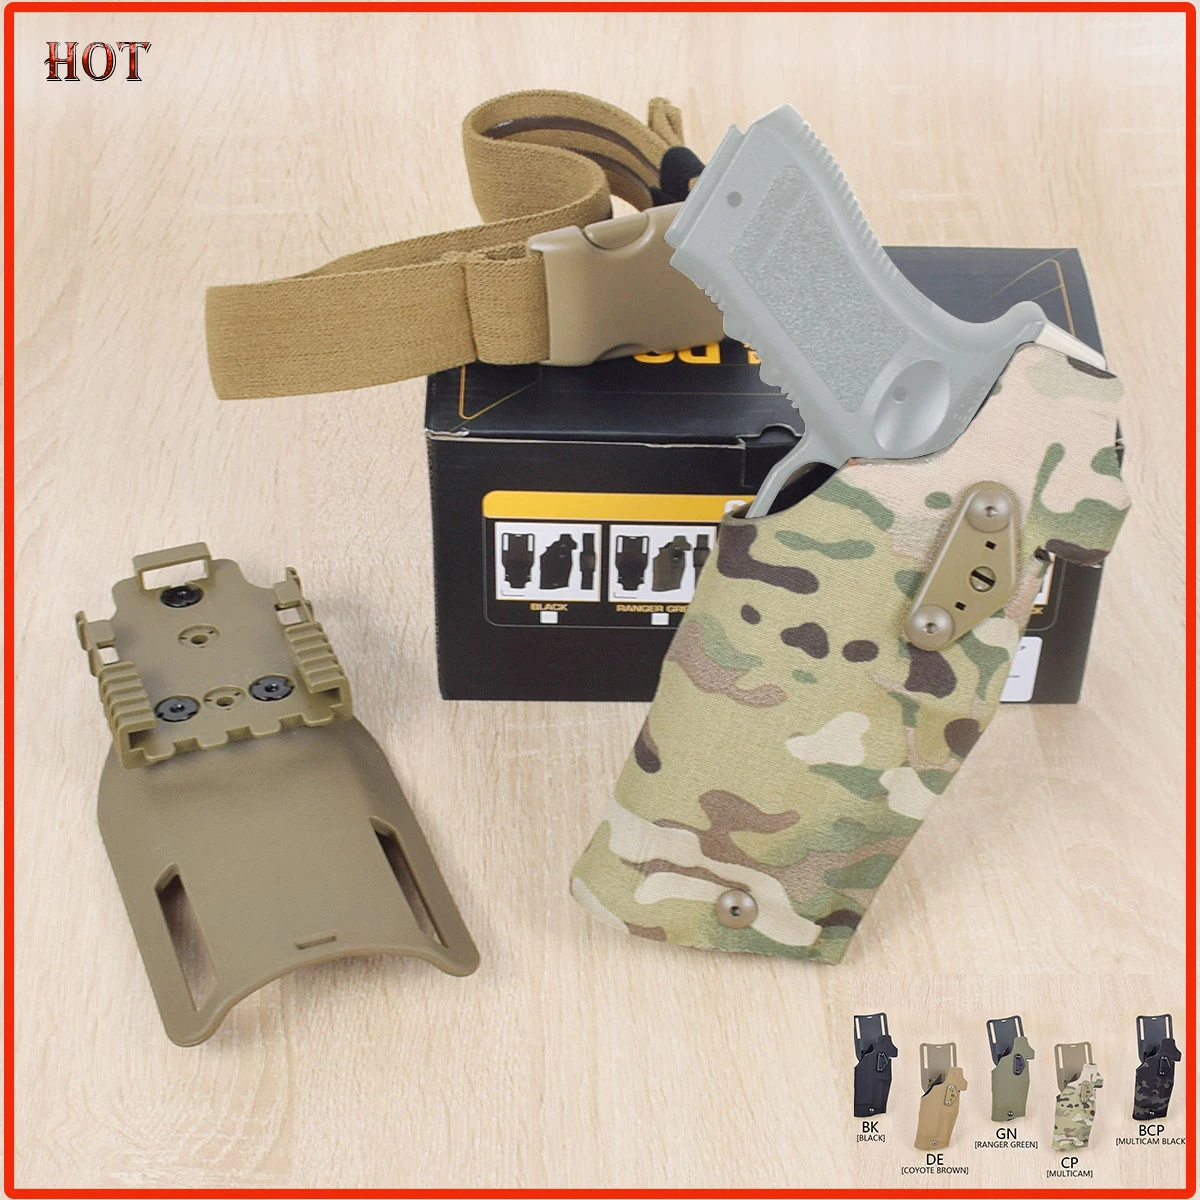 

63DO Tactical Pistol Holster for Glock 17/19 with X300/X300U Flashlight Tactical Hunting Airsoft 54DO Universal Holster 6354DO